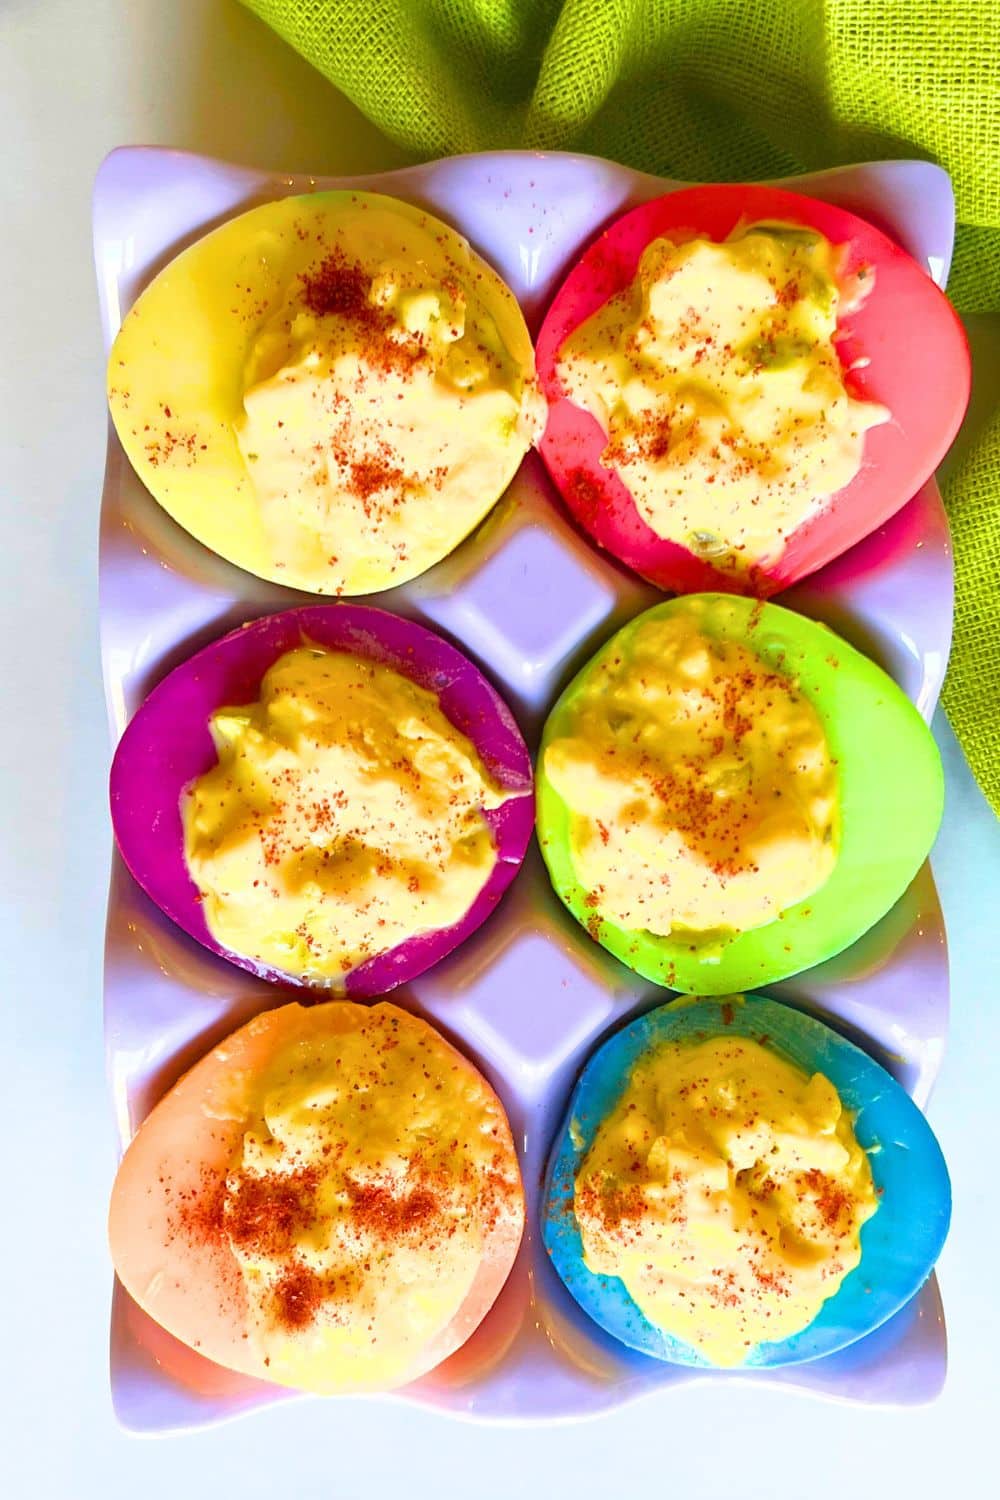 Dyed Deviled Eggs - different colored eggs whites filled with devil egg filling on a table